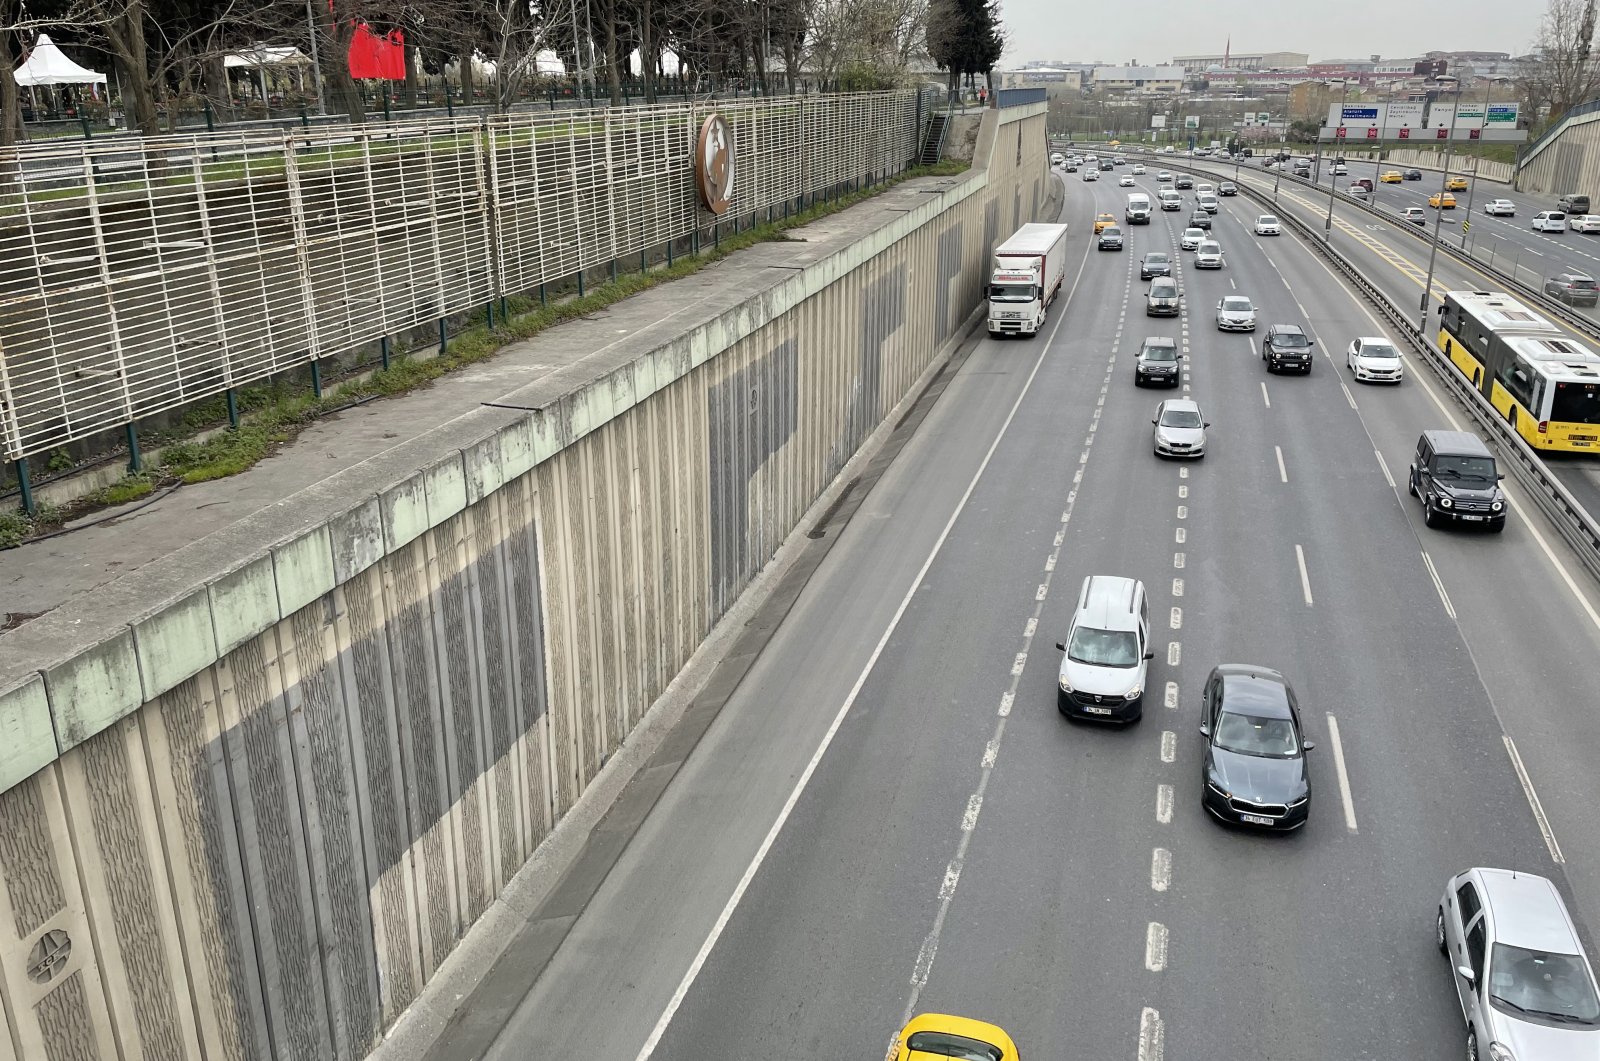 View of empty walls on the side of a highway, in Istanbul, Turkey, April 11, 2022. (AA Photo)